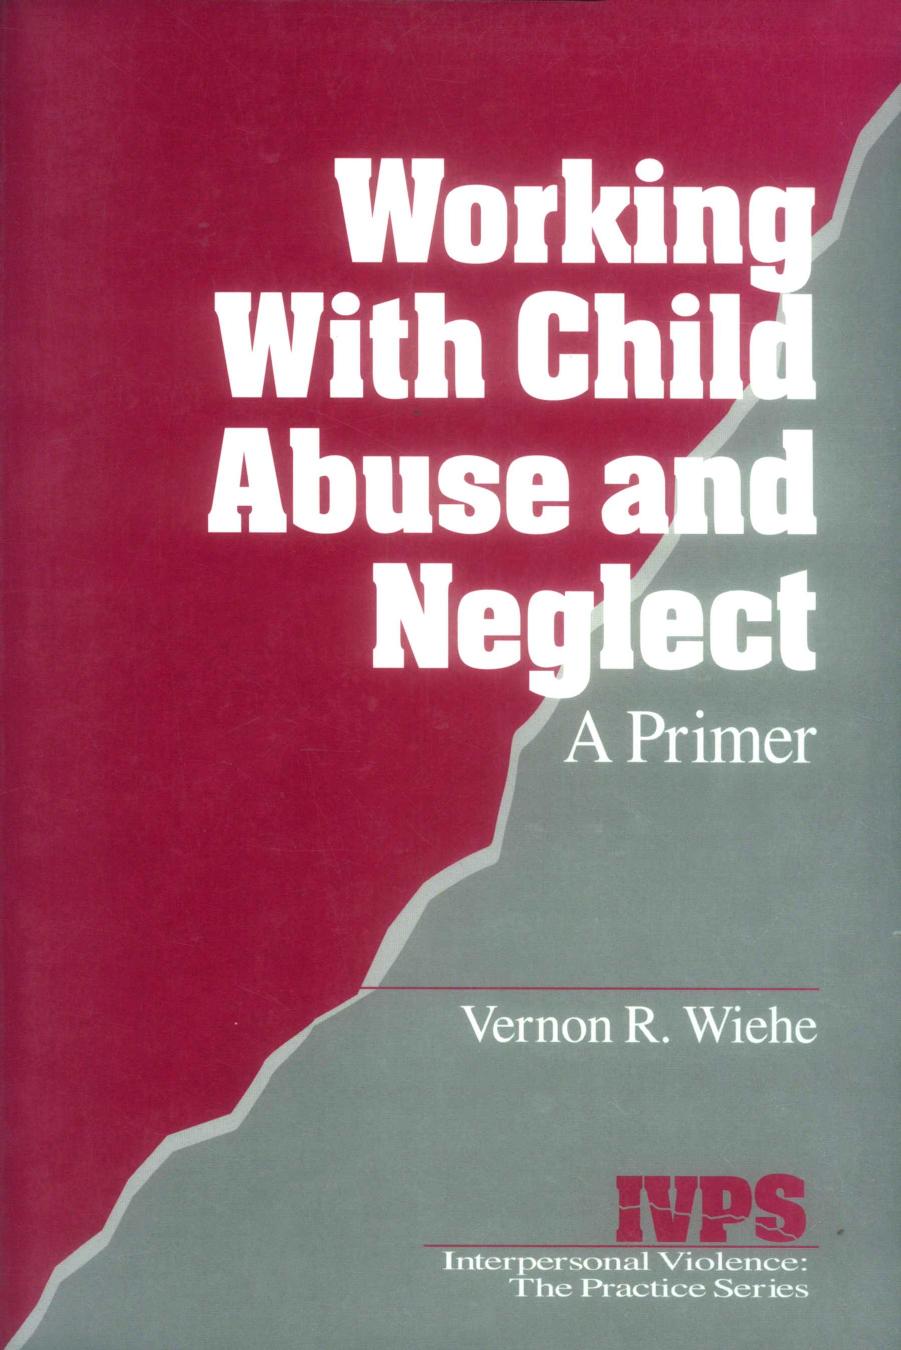 Working with Child Abuse and Neglect : A Primer by Vernon R. Wiehe